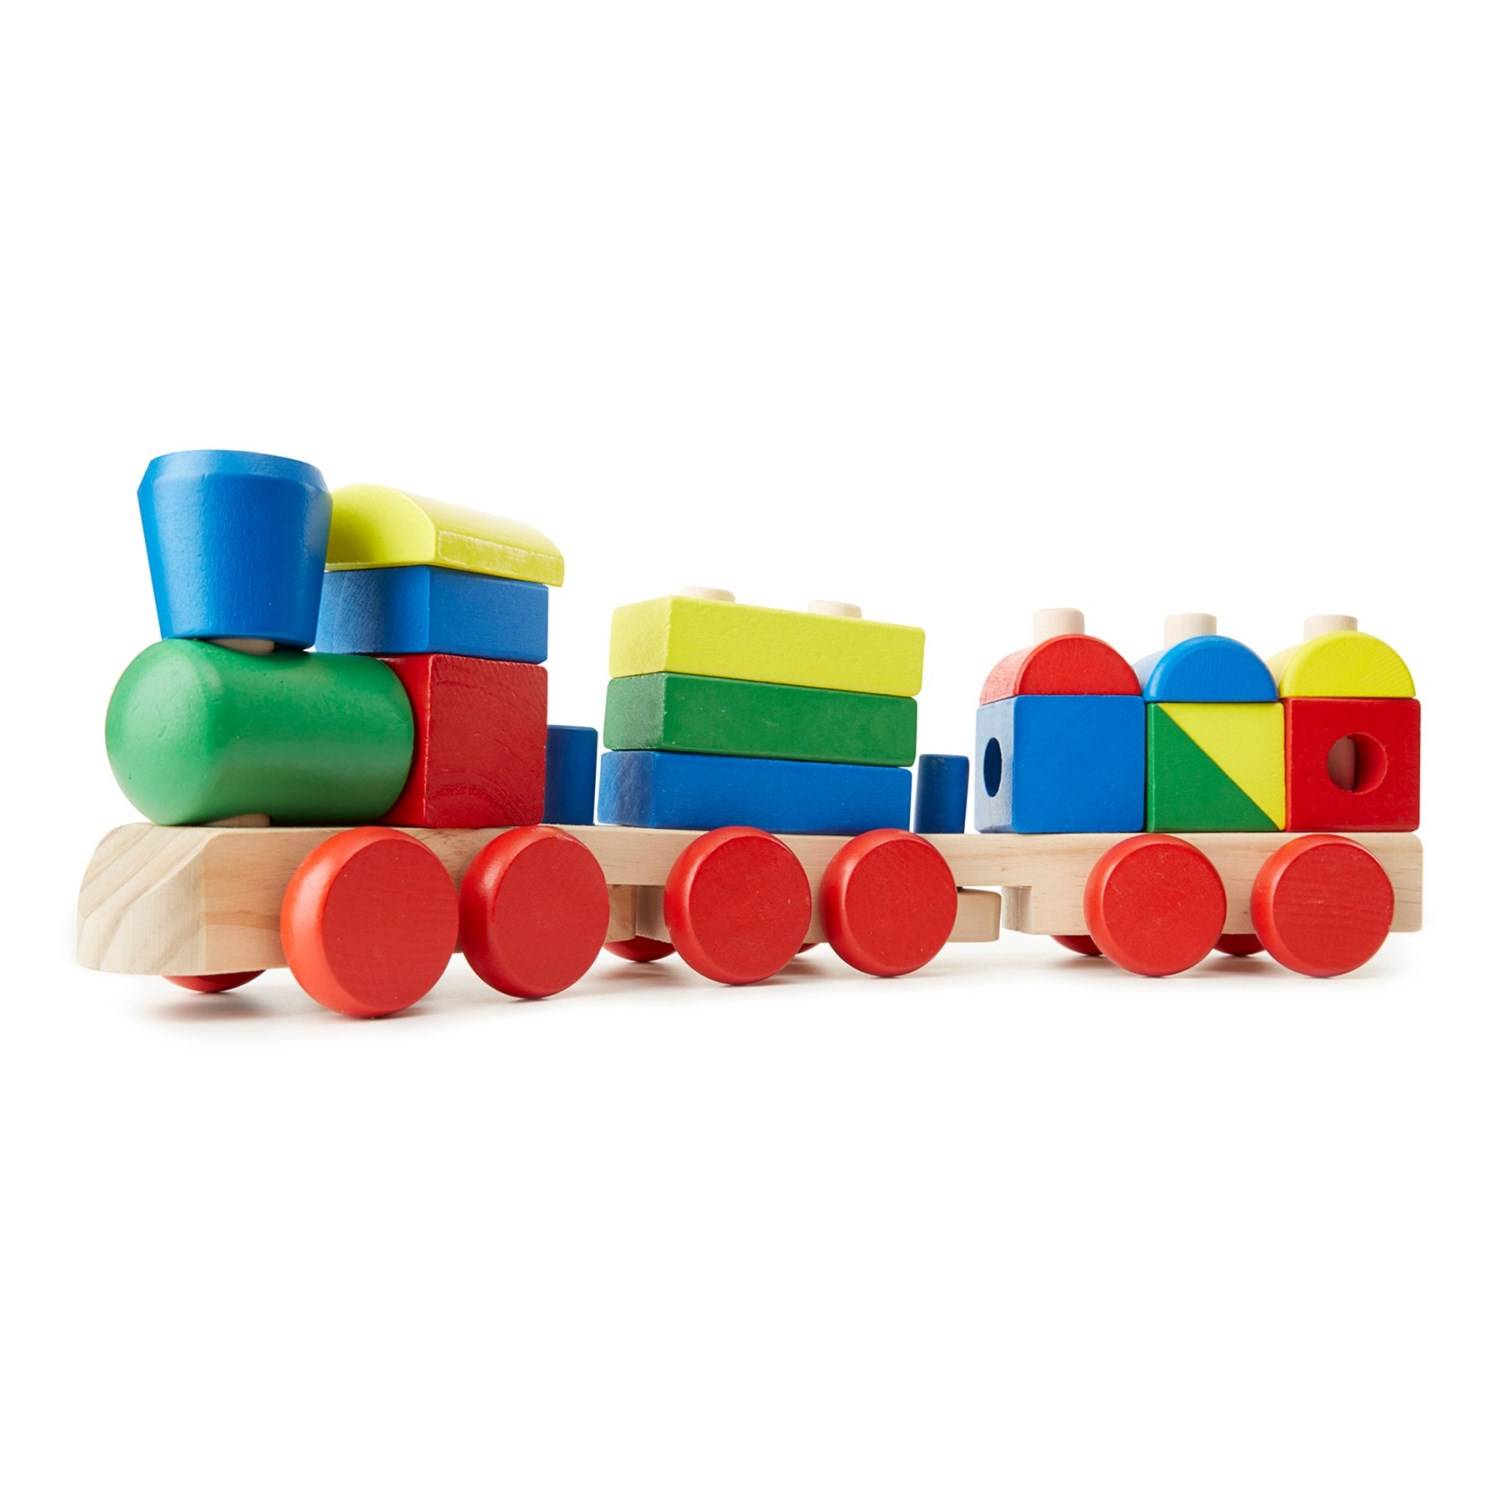 Melissa and Doug Train Activity Table- CANNOT BE SHIPPED - Playthings  Aplenty